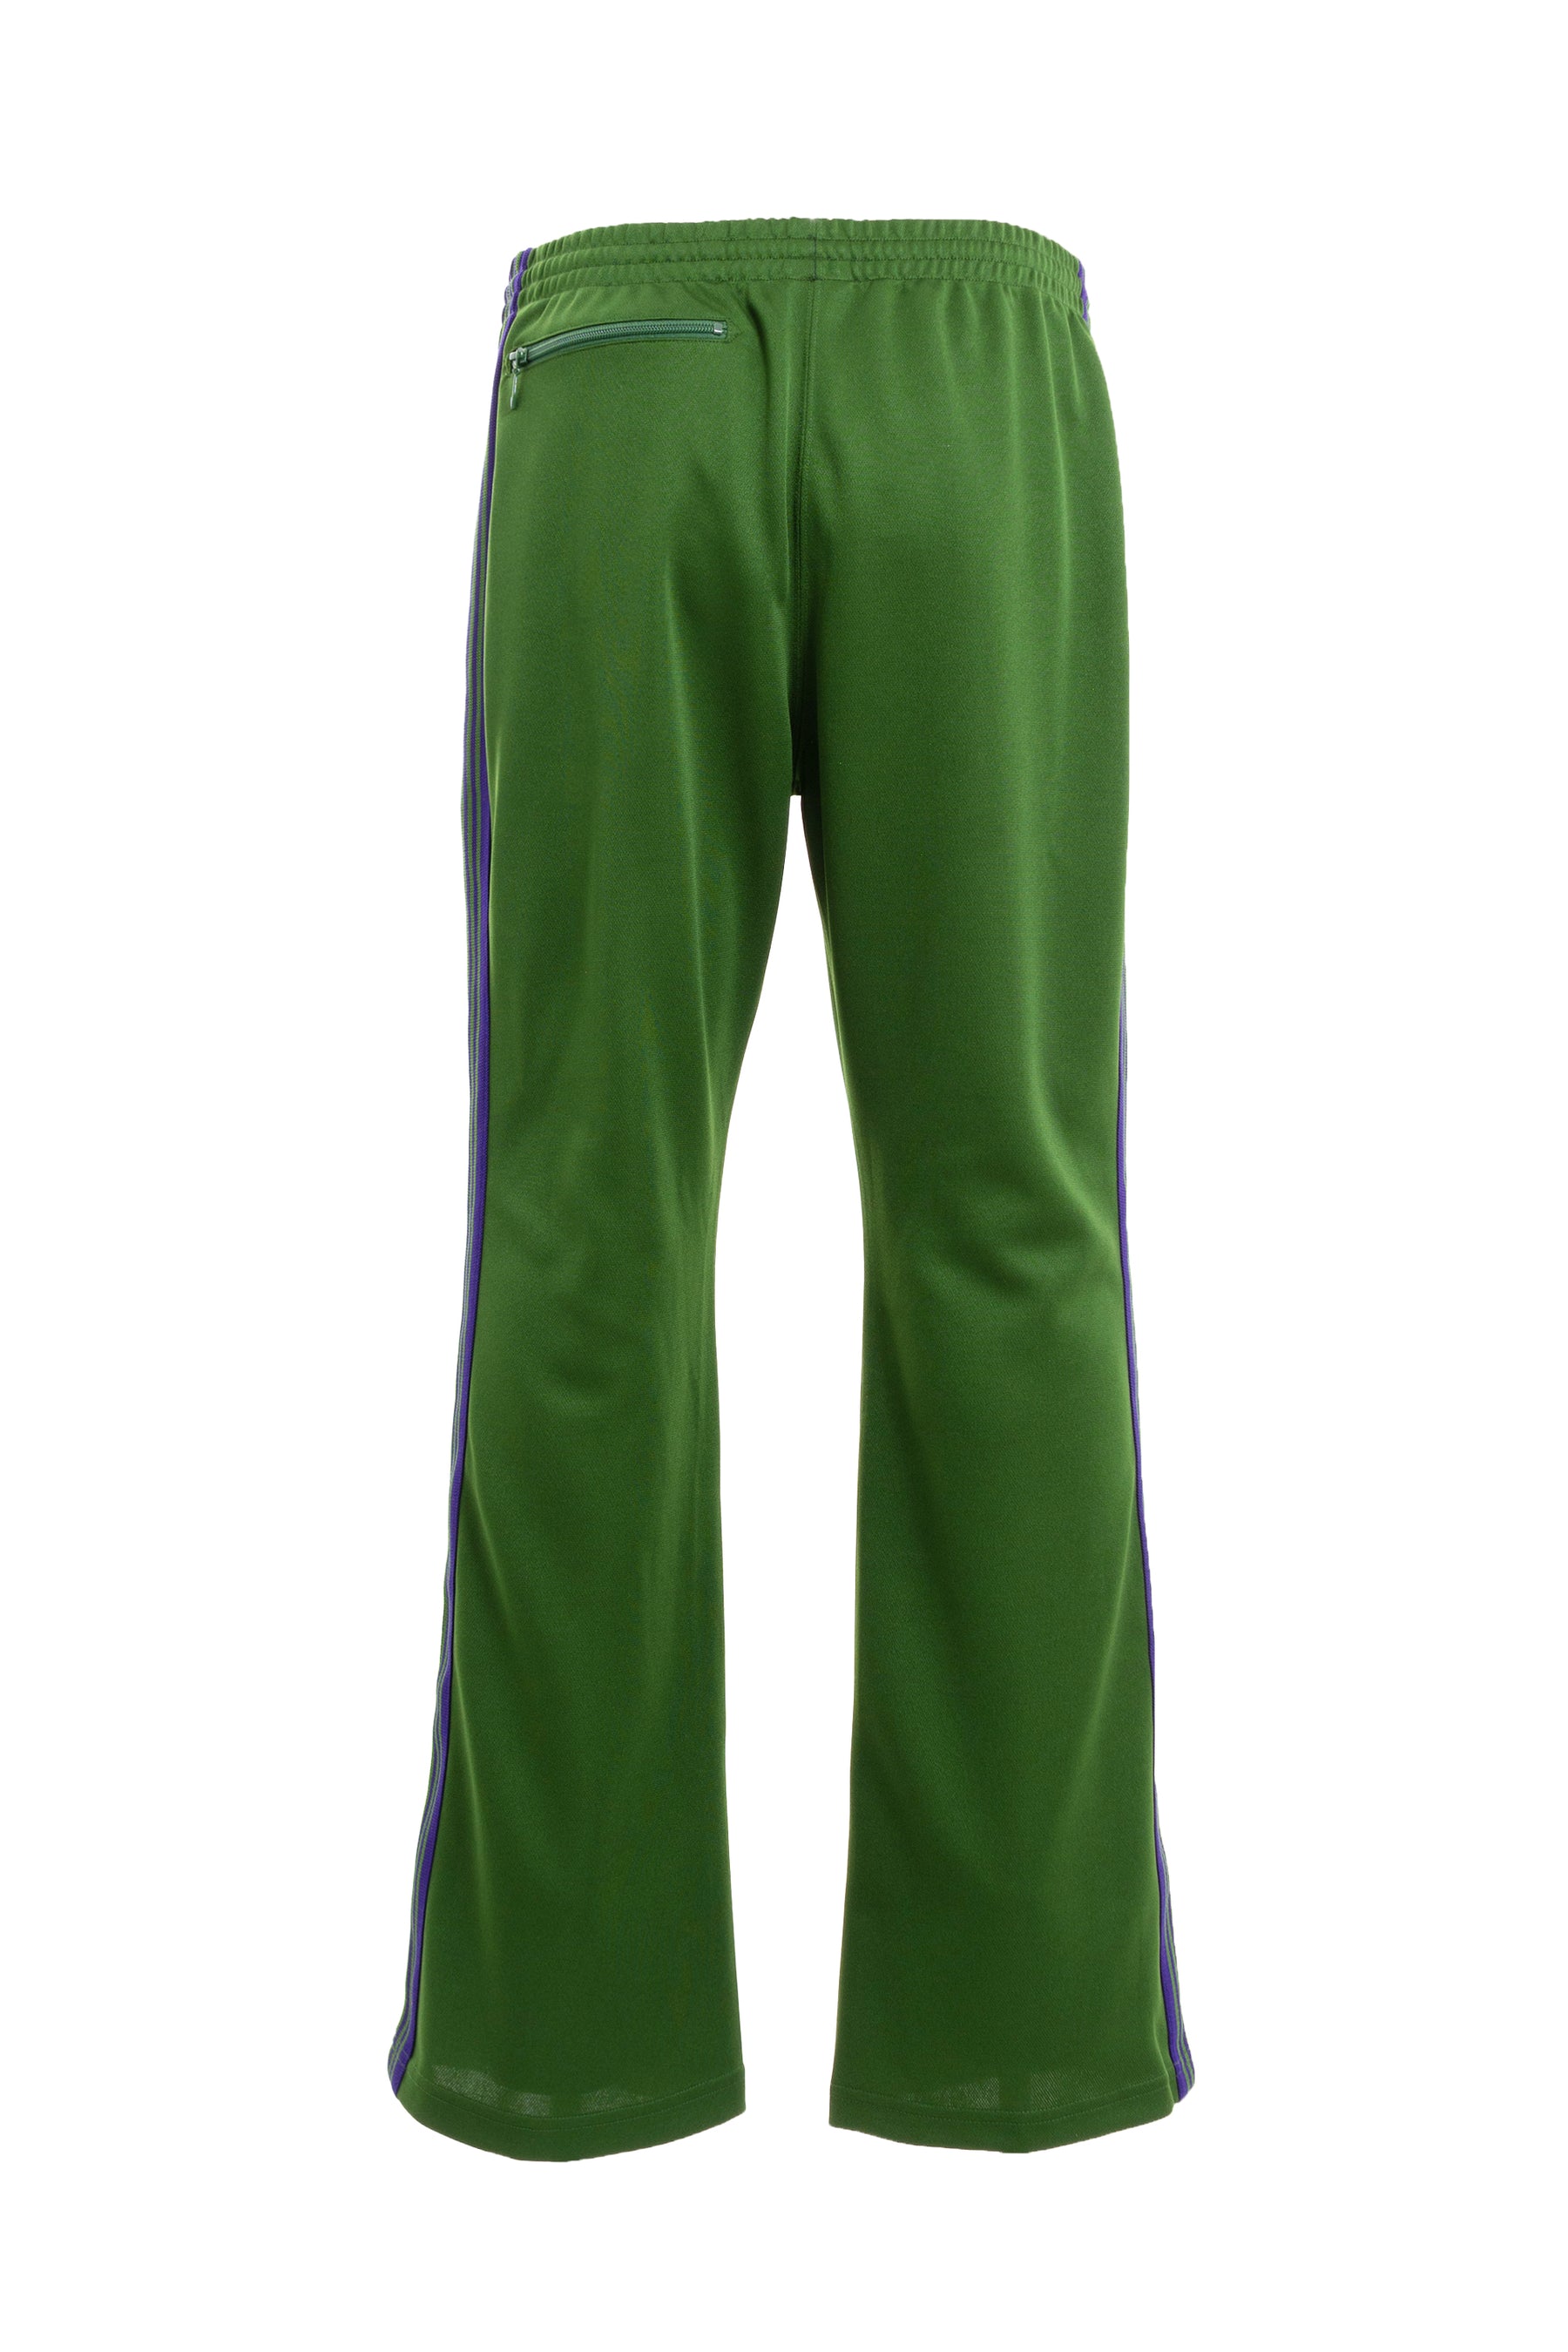 Needles FW23 BOOT-CUT TRACK PANT - POLY SMOOTH / IVY GRN -NUBIAN